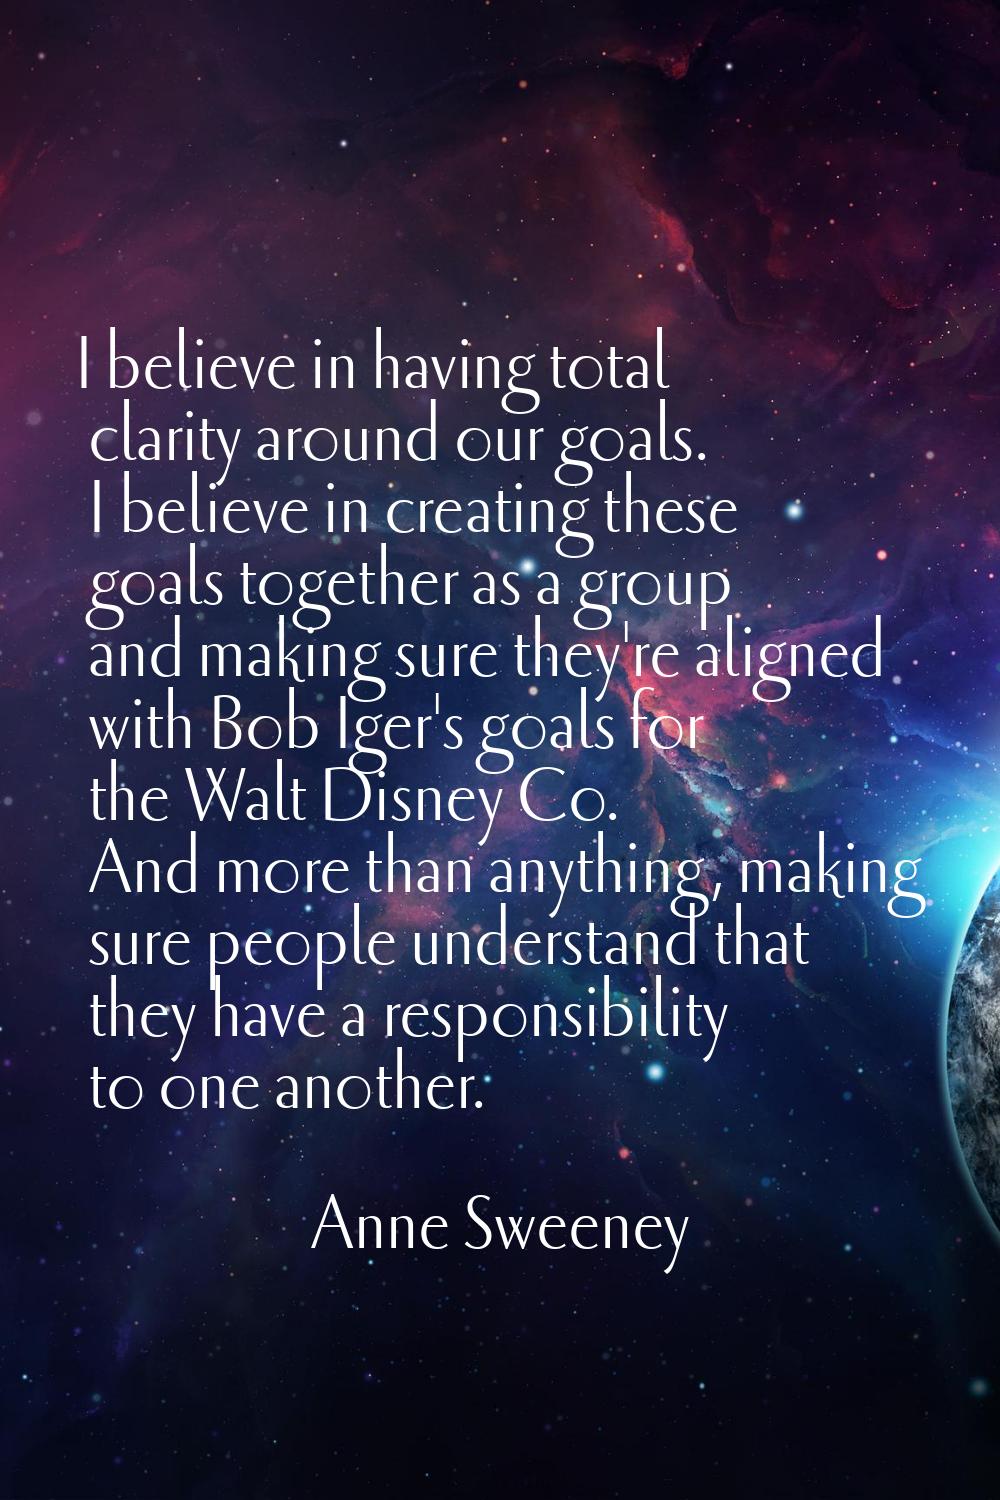 I believe in having total clarity around our goals. I believe in creating these goals together as a